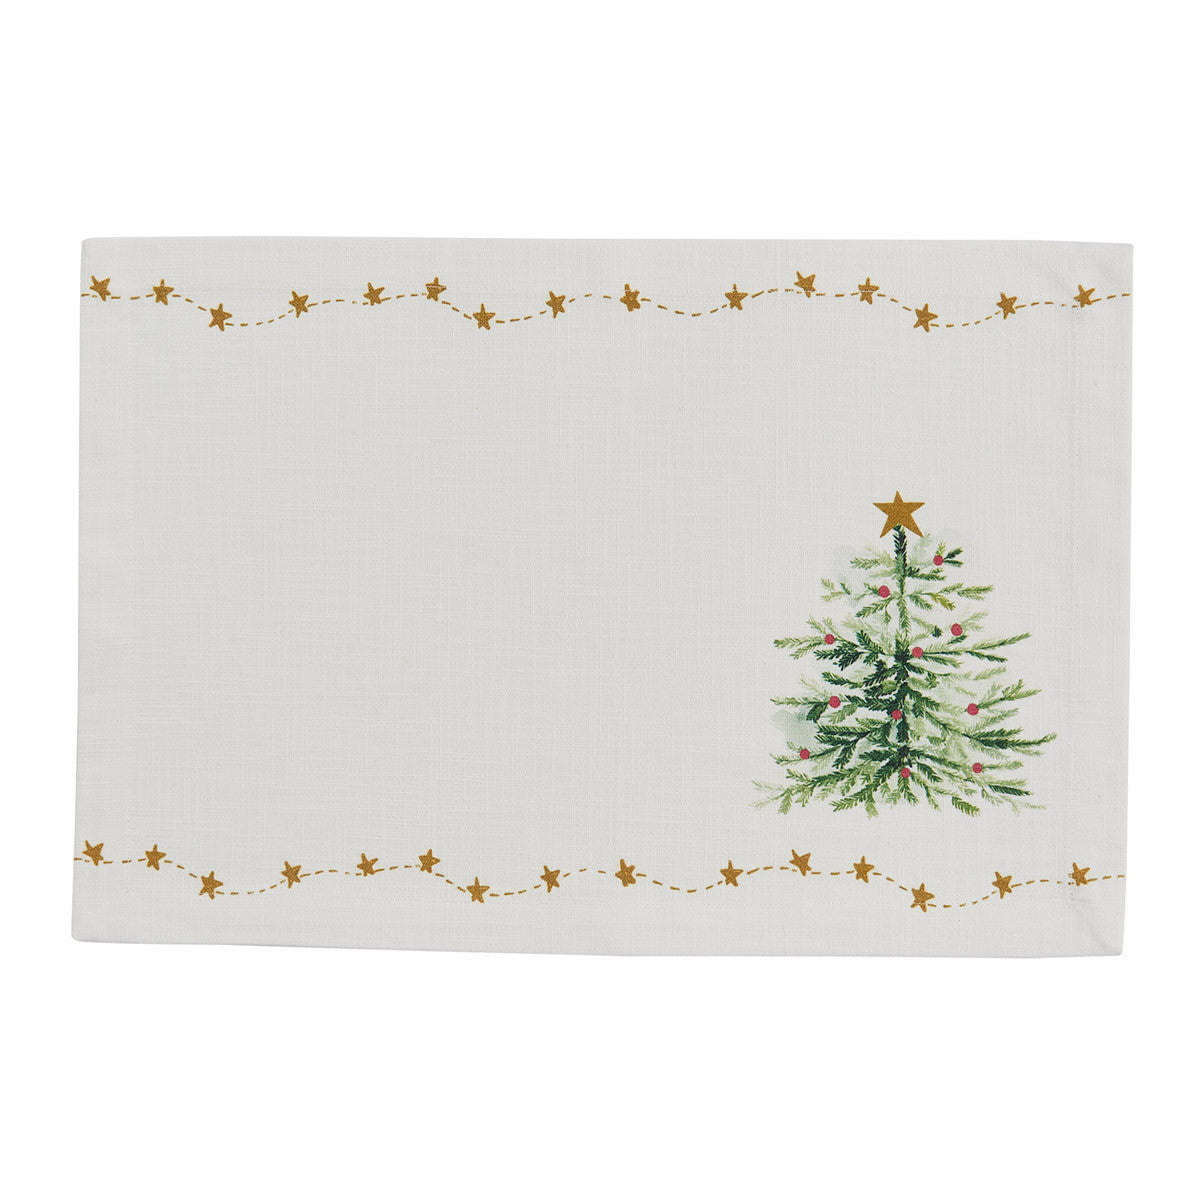 Rustic Christmas Placemats - Stars Set of 4 Park Designs